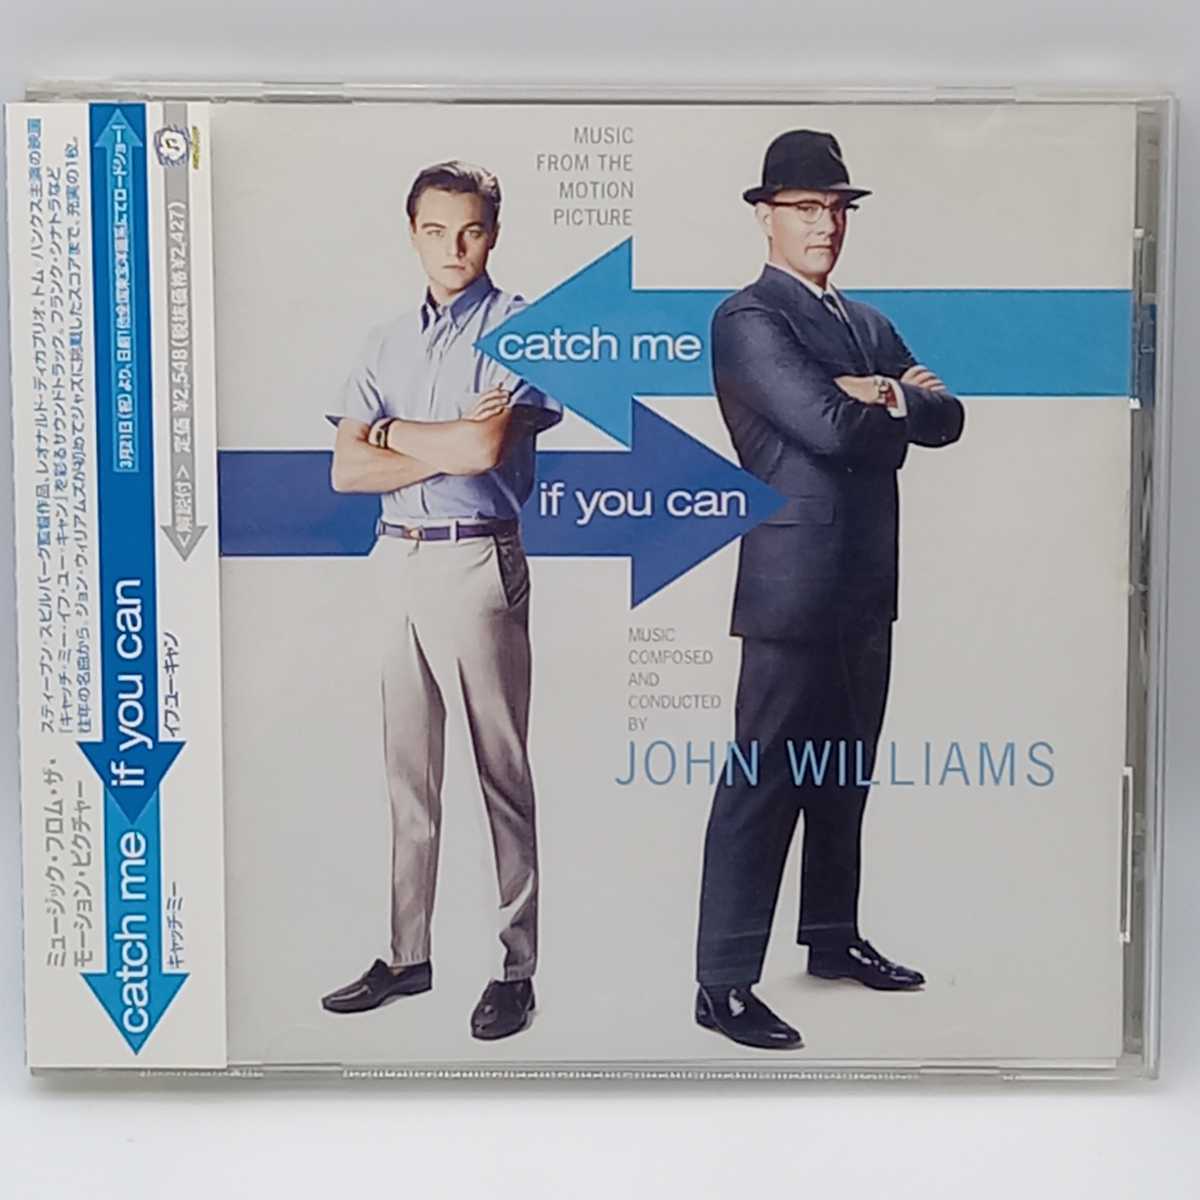 C-0629★中古CD 帯付★キャッチ・ミー・イフ・ユー・キャン OST サントラ CATCH ME IF YOU CAN UICW-1032の画像1